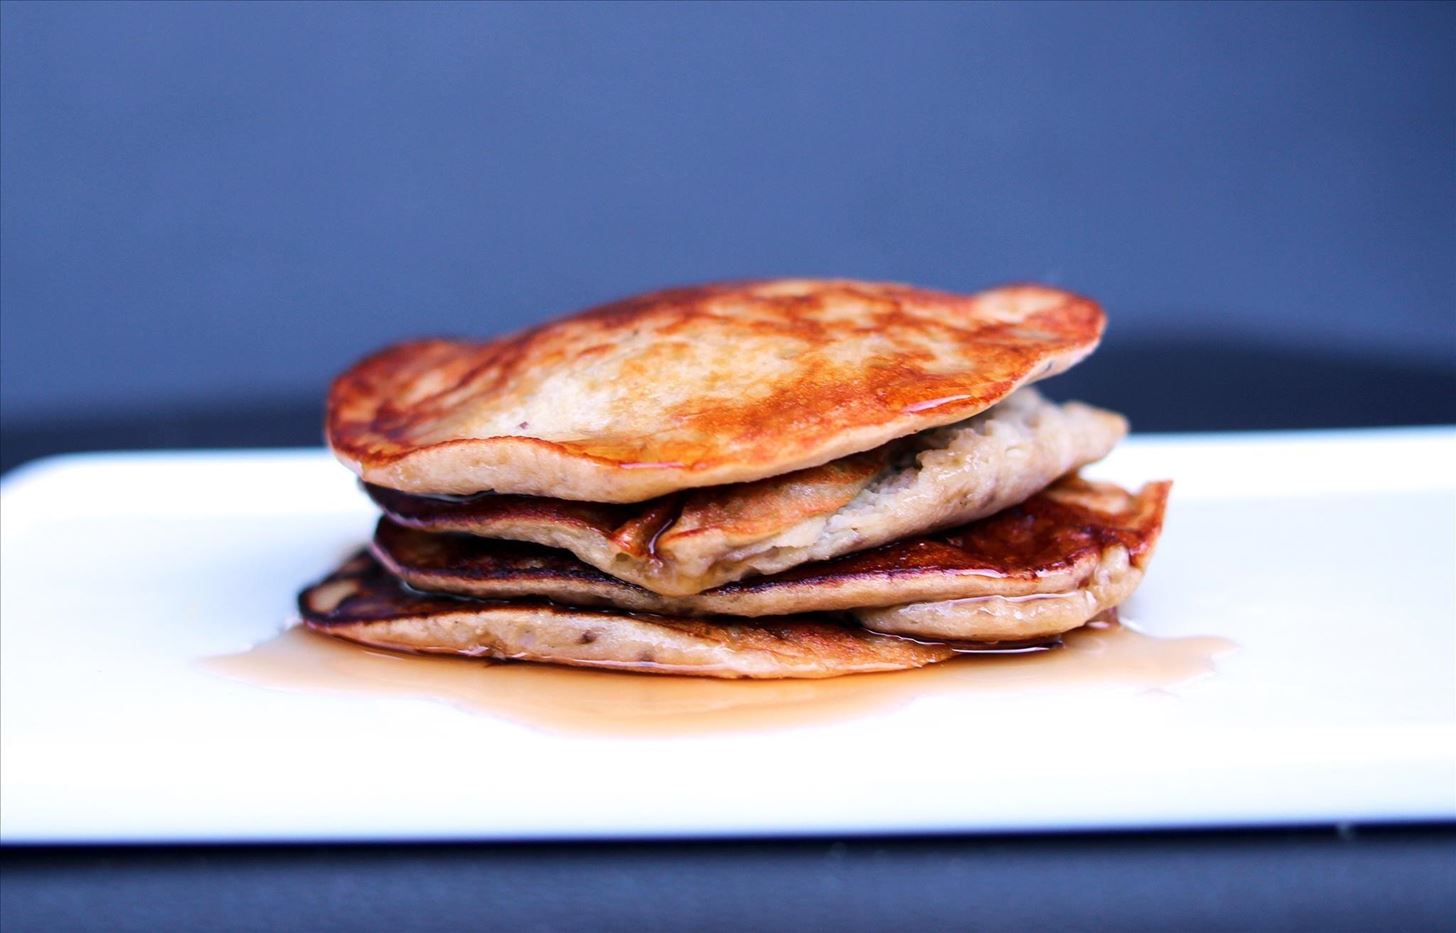 How to Make 2-Ingredient Pancakes That Are High Protein, Low-Carb & Gluten-Free